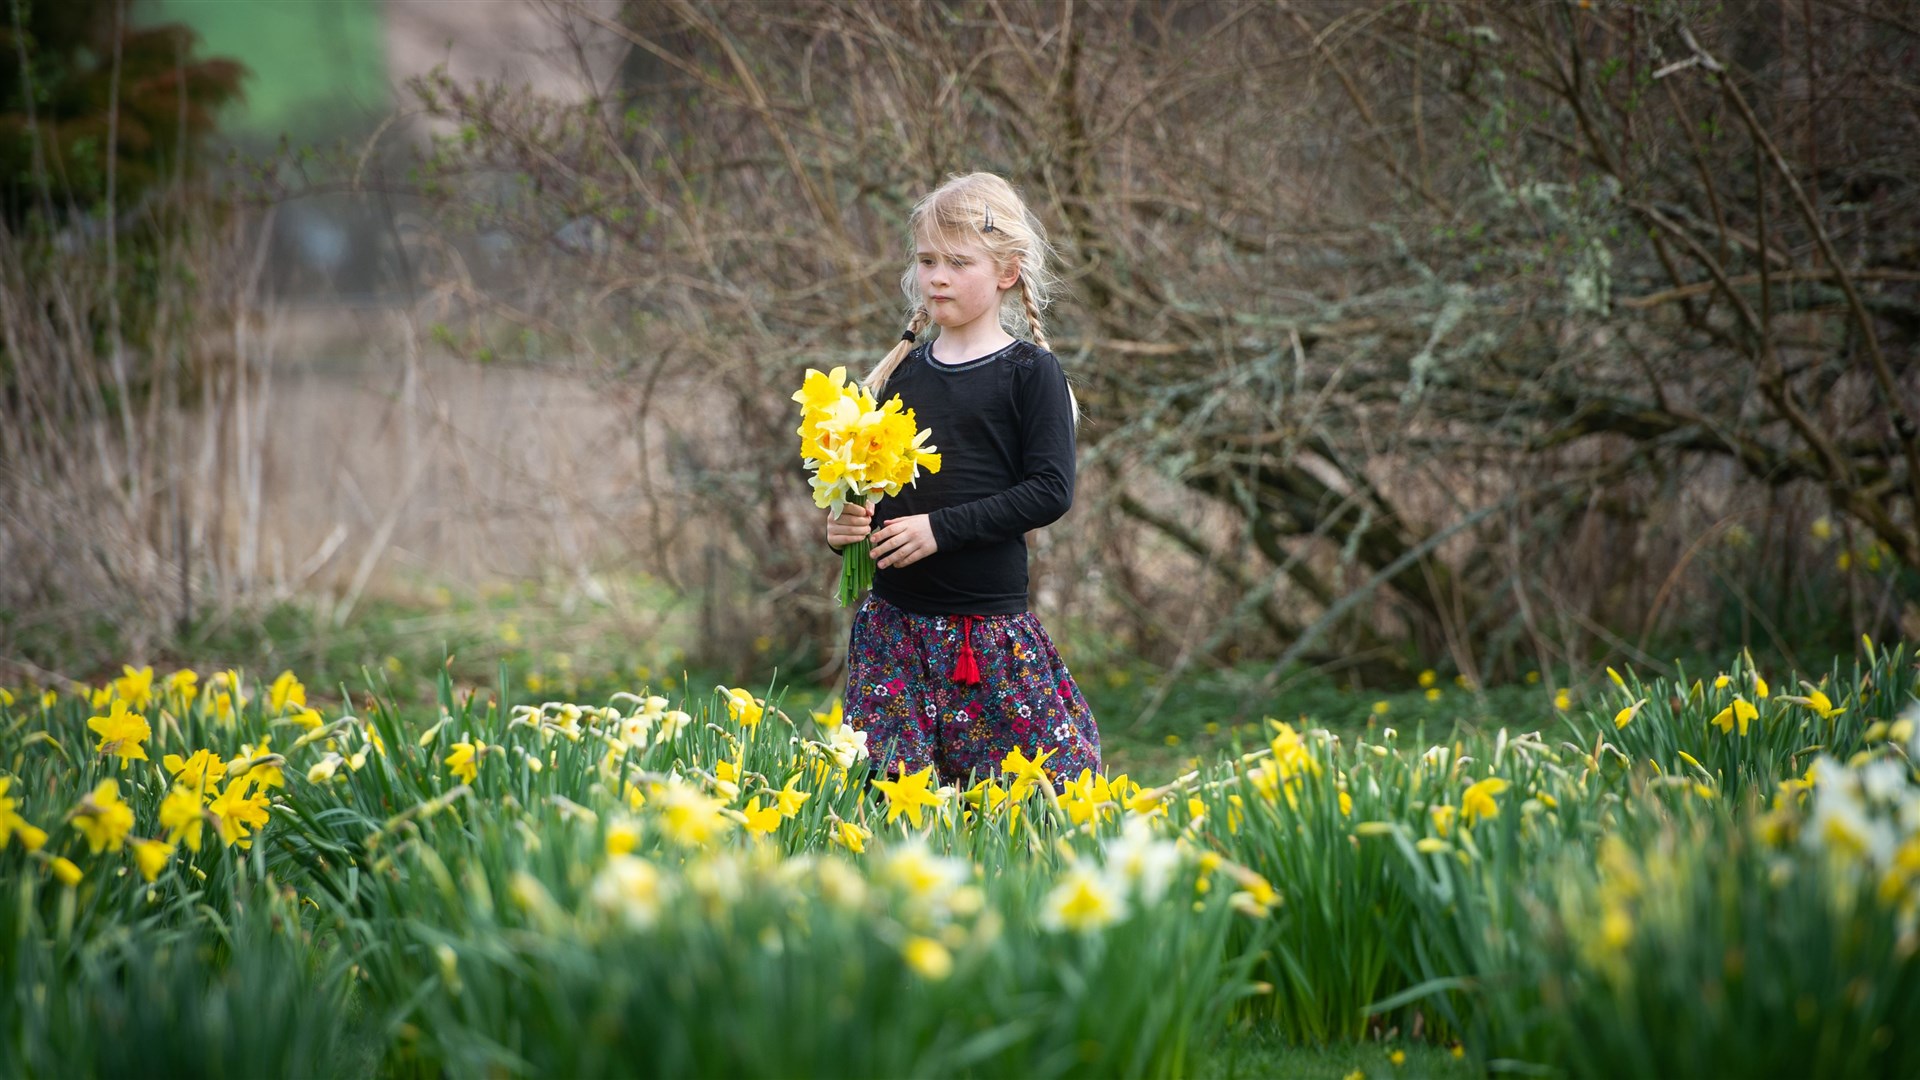 The Foulis Castle Daffodil Day will benefit a cause close to the hearts of the Munro family – and many others watching the tragic events in Ukraine develop.